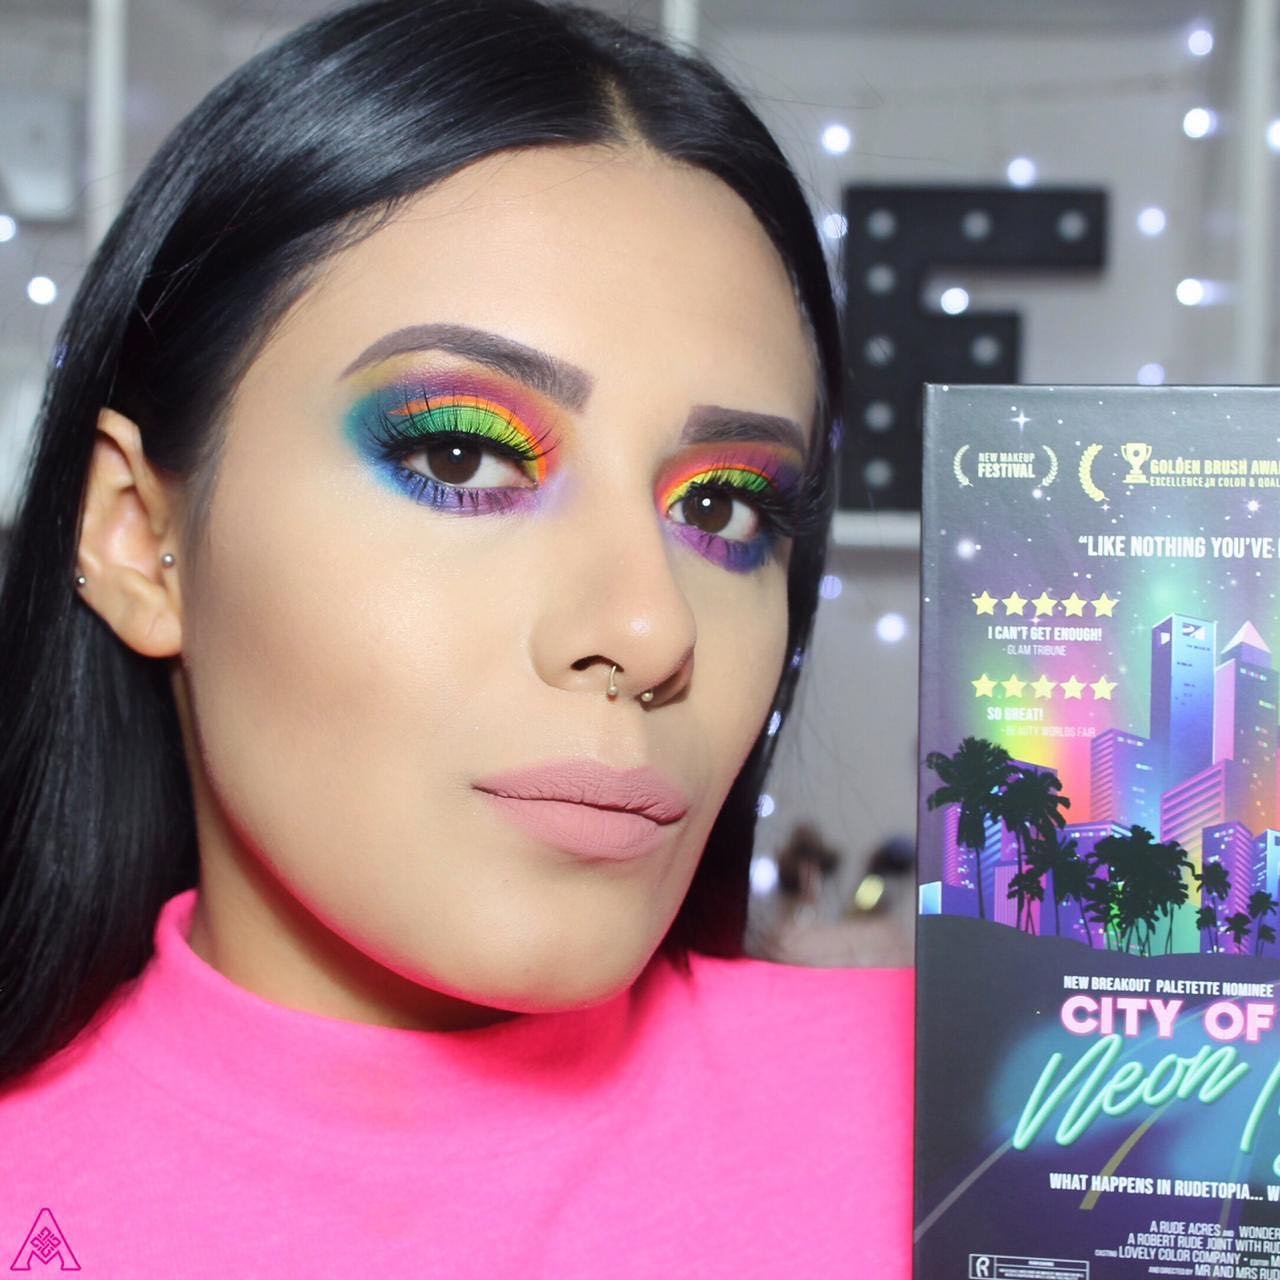 ovn bandage by Rude Cosmetics on Twitter: "A simply colorful and stunning look by  @_emmaamor to help you stand out this Halloween season! Check out our City  collection especially our Neon Lights palette for inspiration —